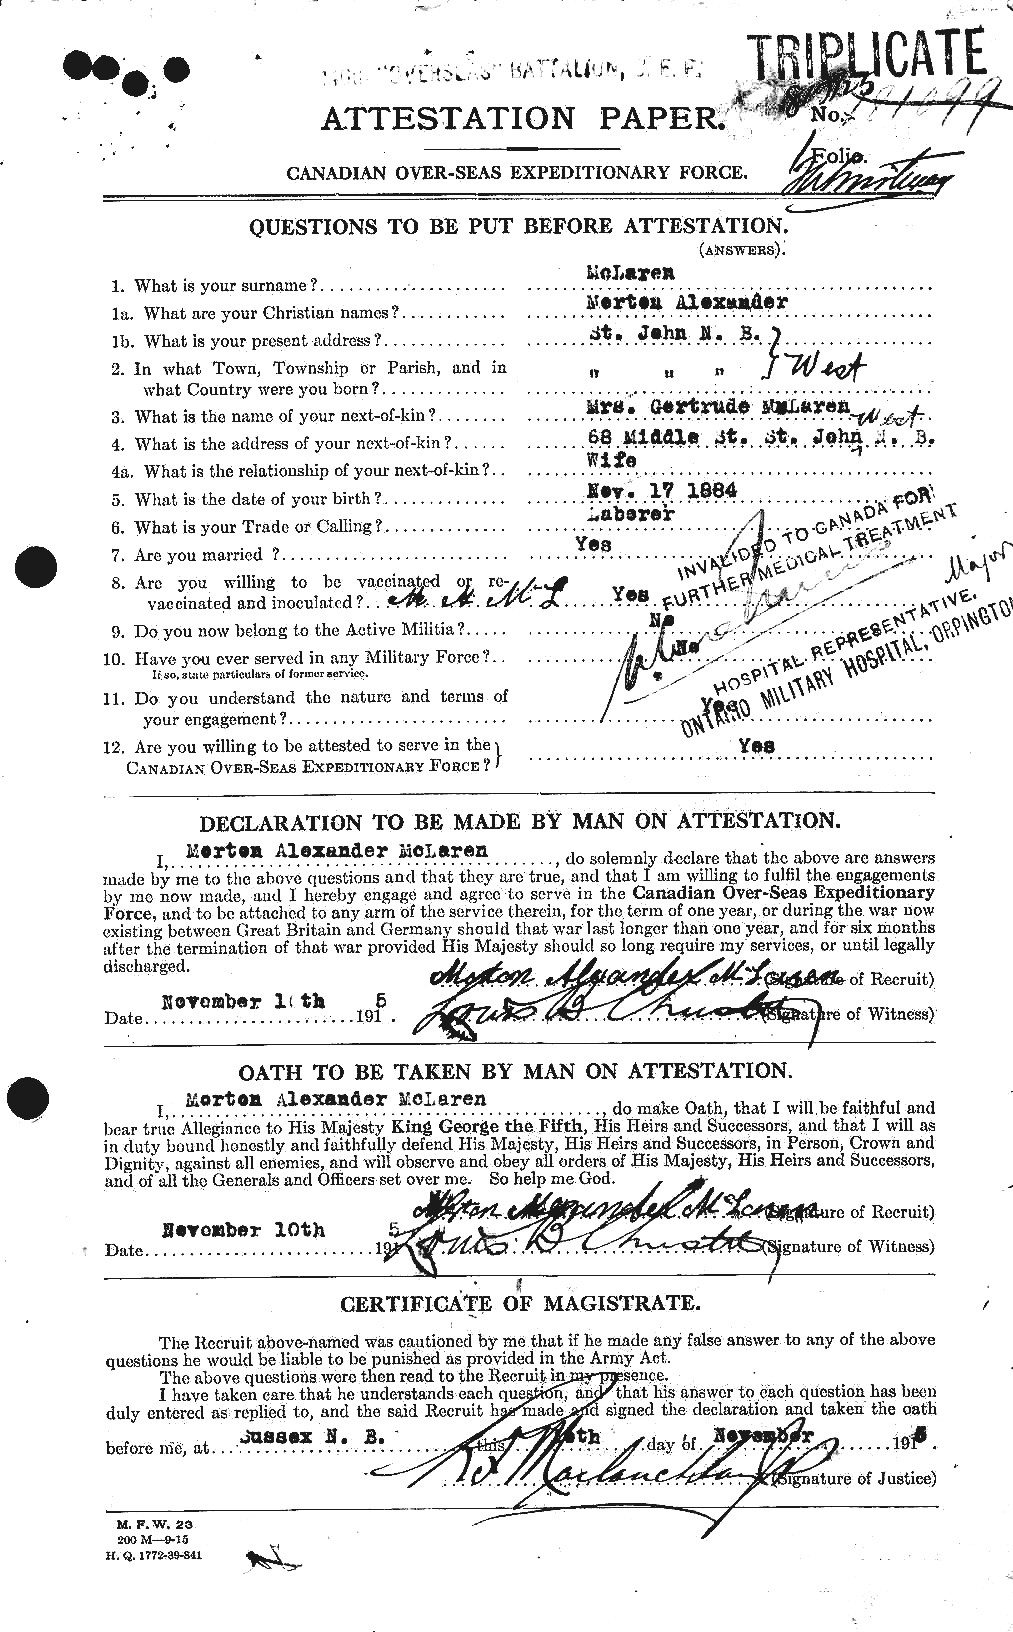 Personnel Records of the First World War - CEF 535943a